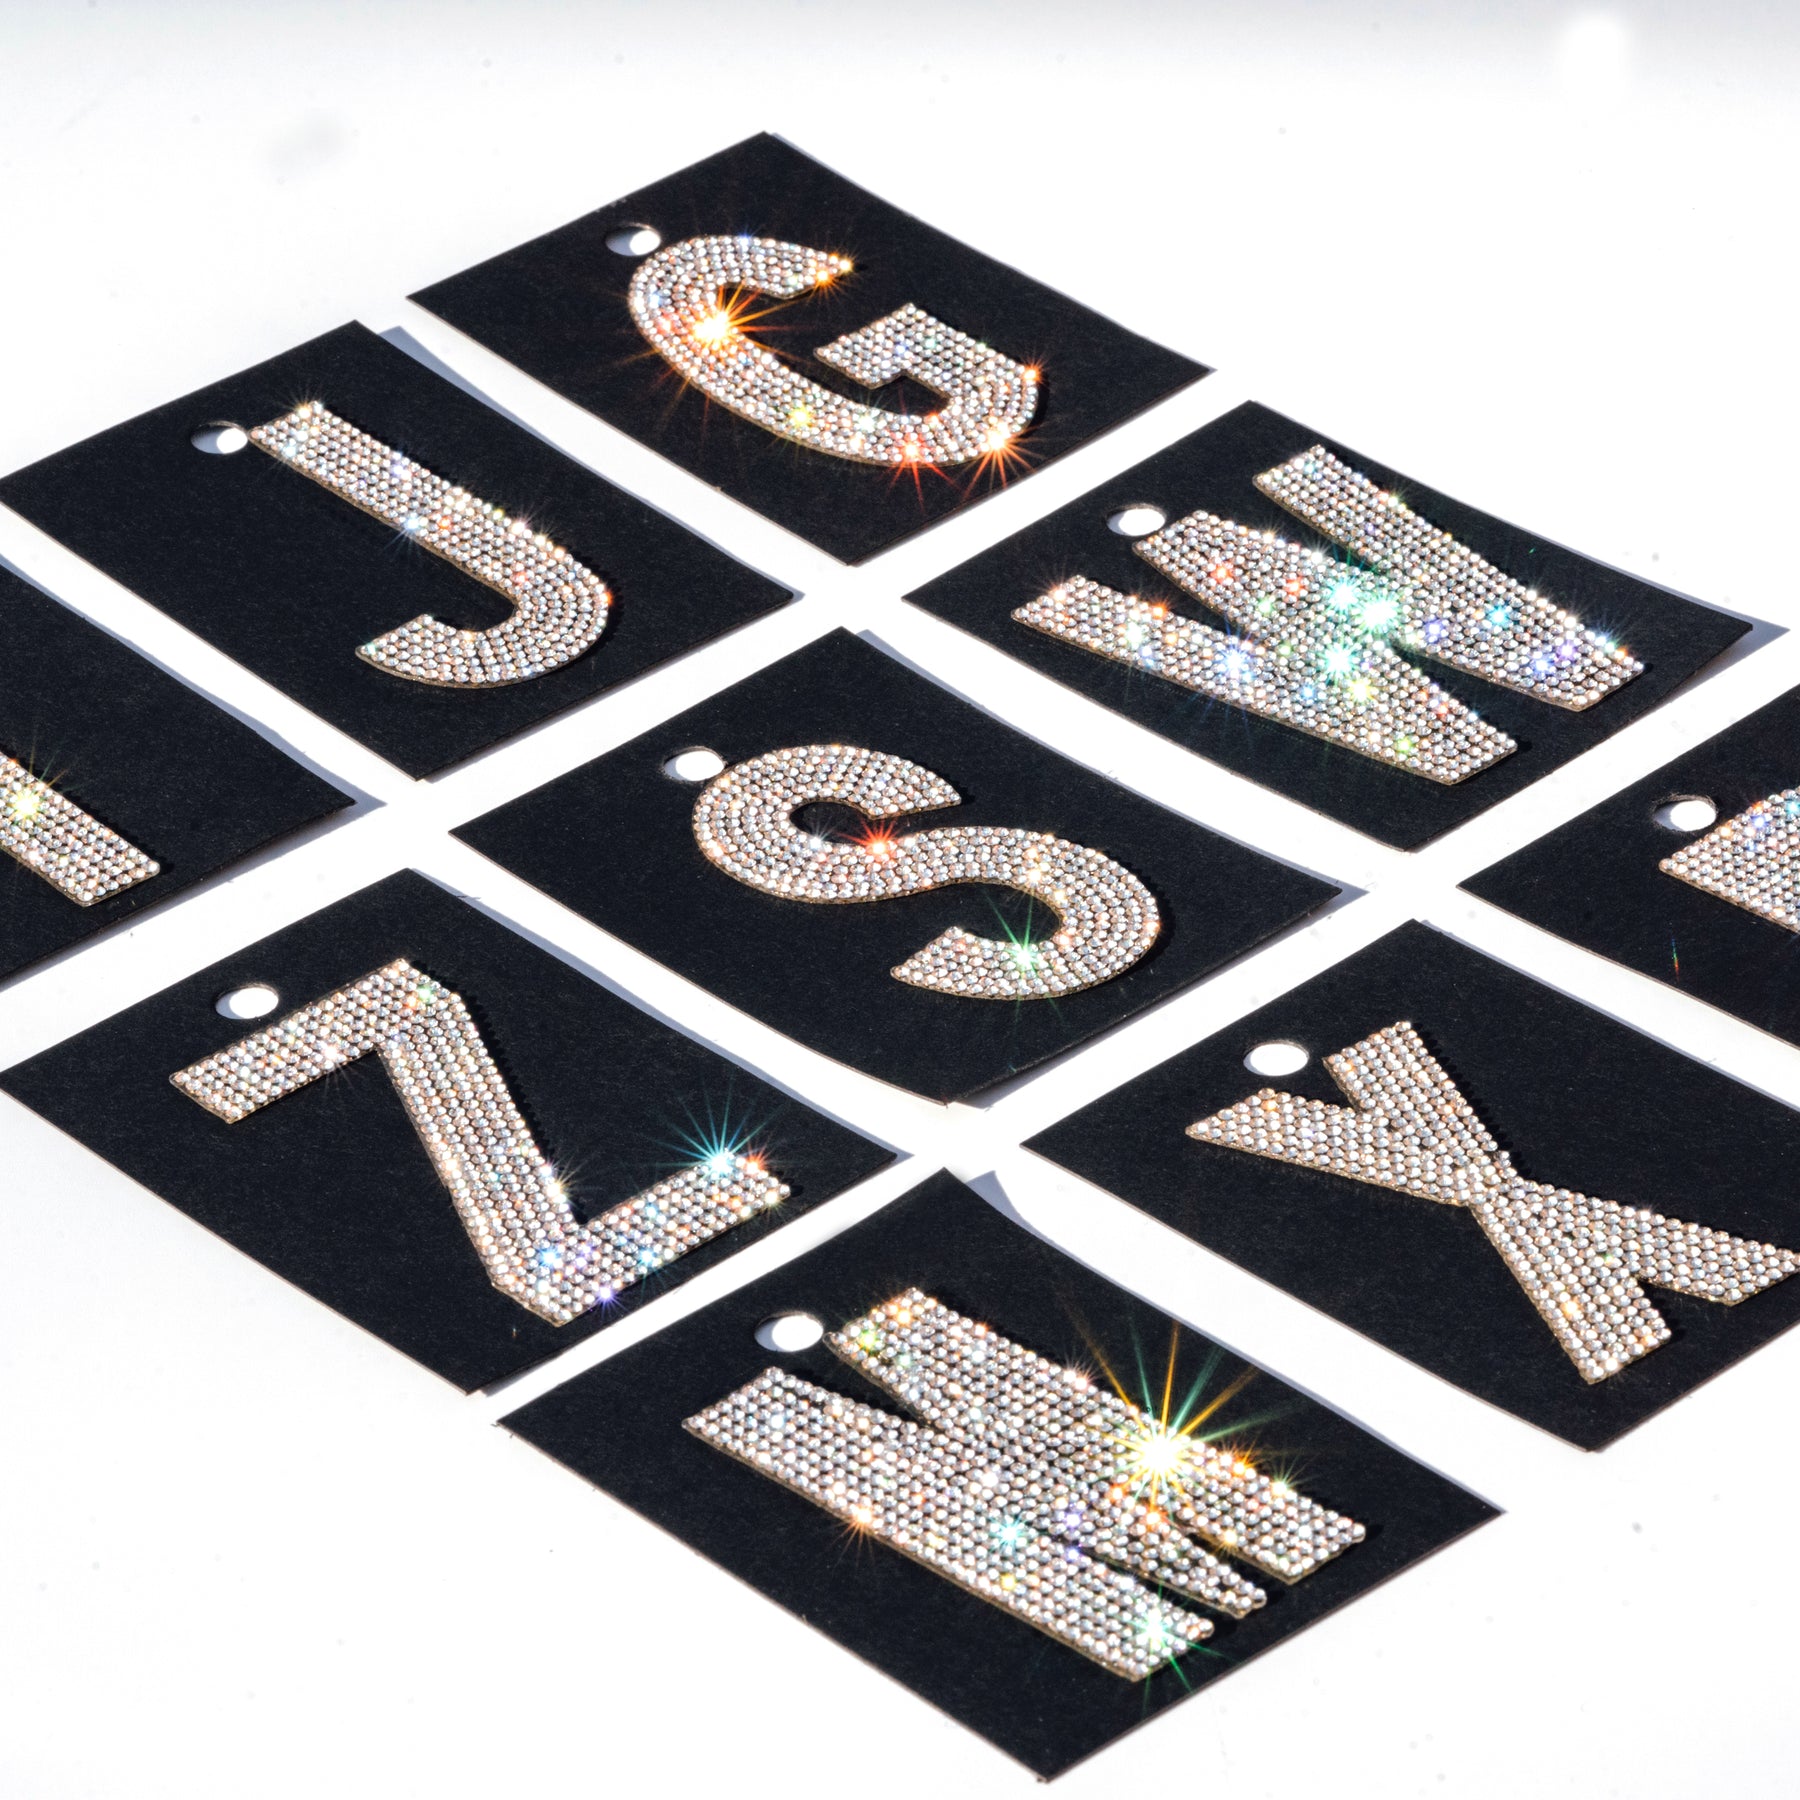 Reduced！！52pcs Applique Letter Patch Iron On Rhinestones For